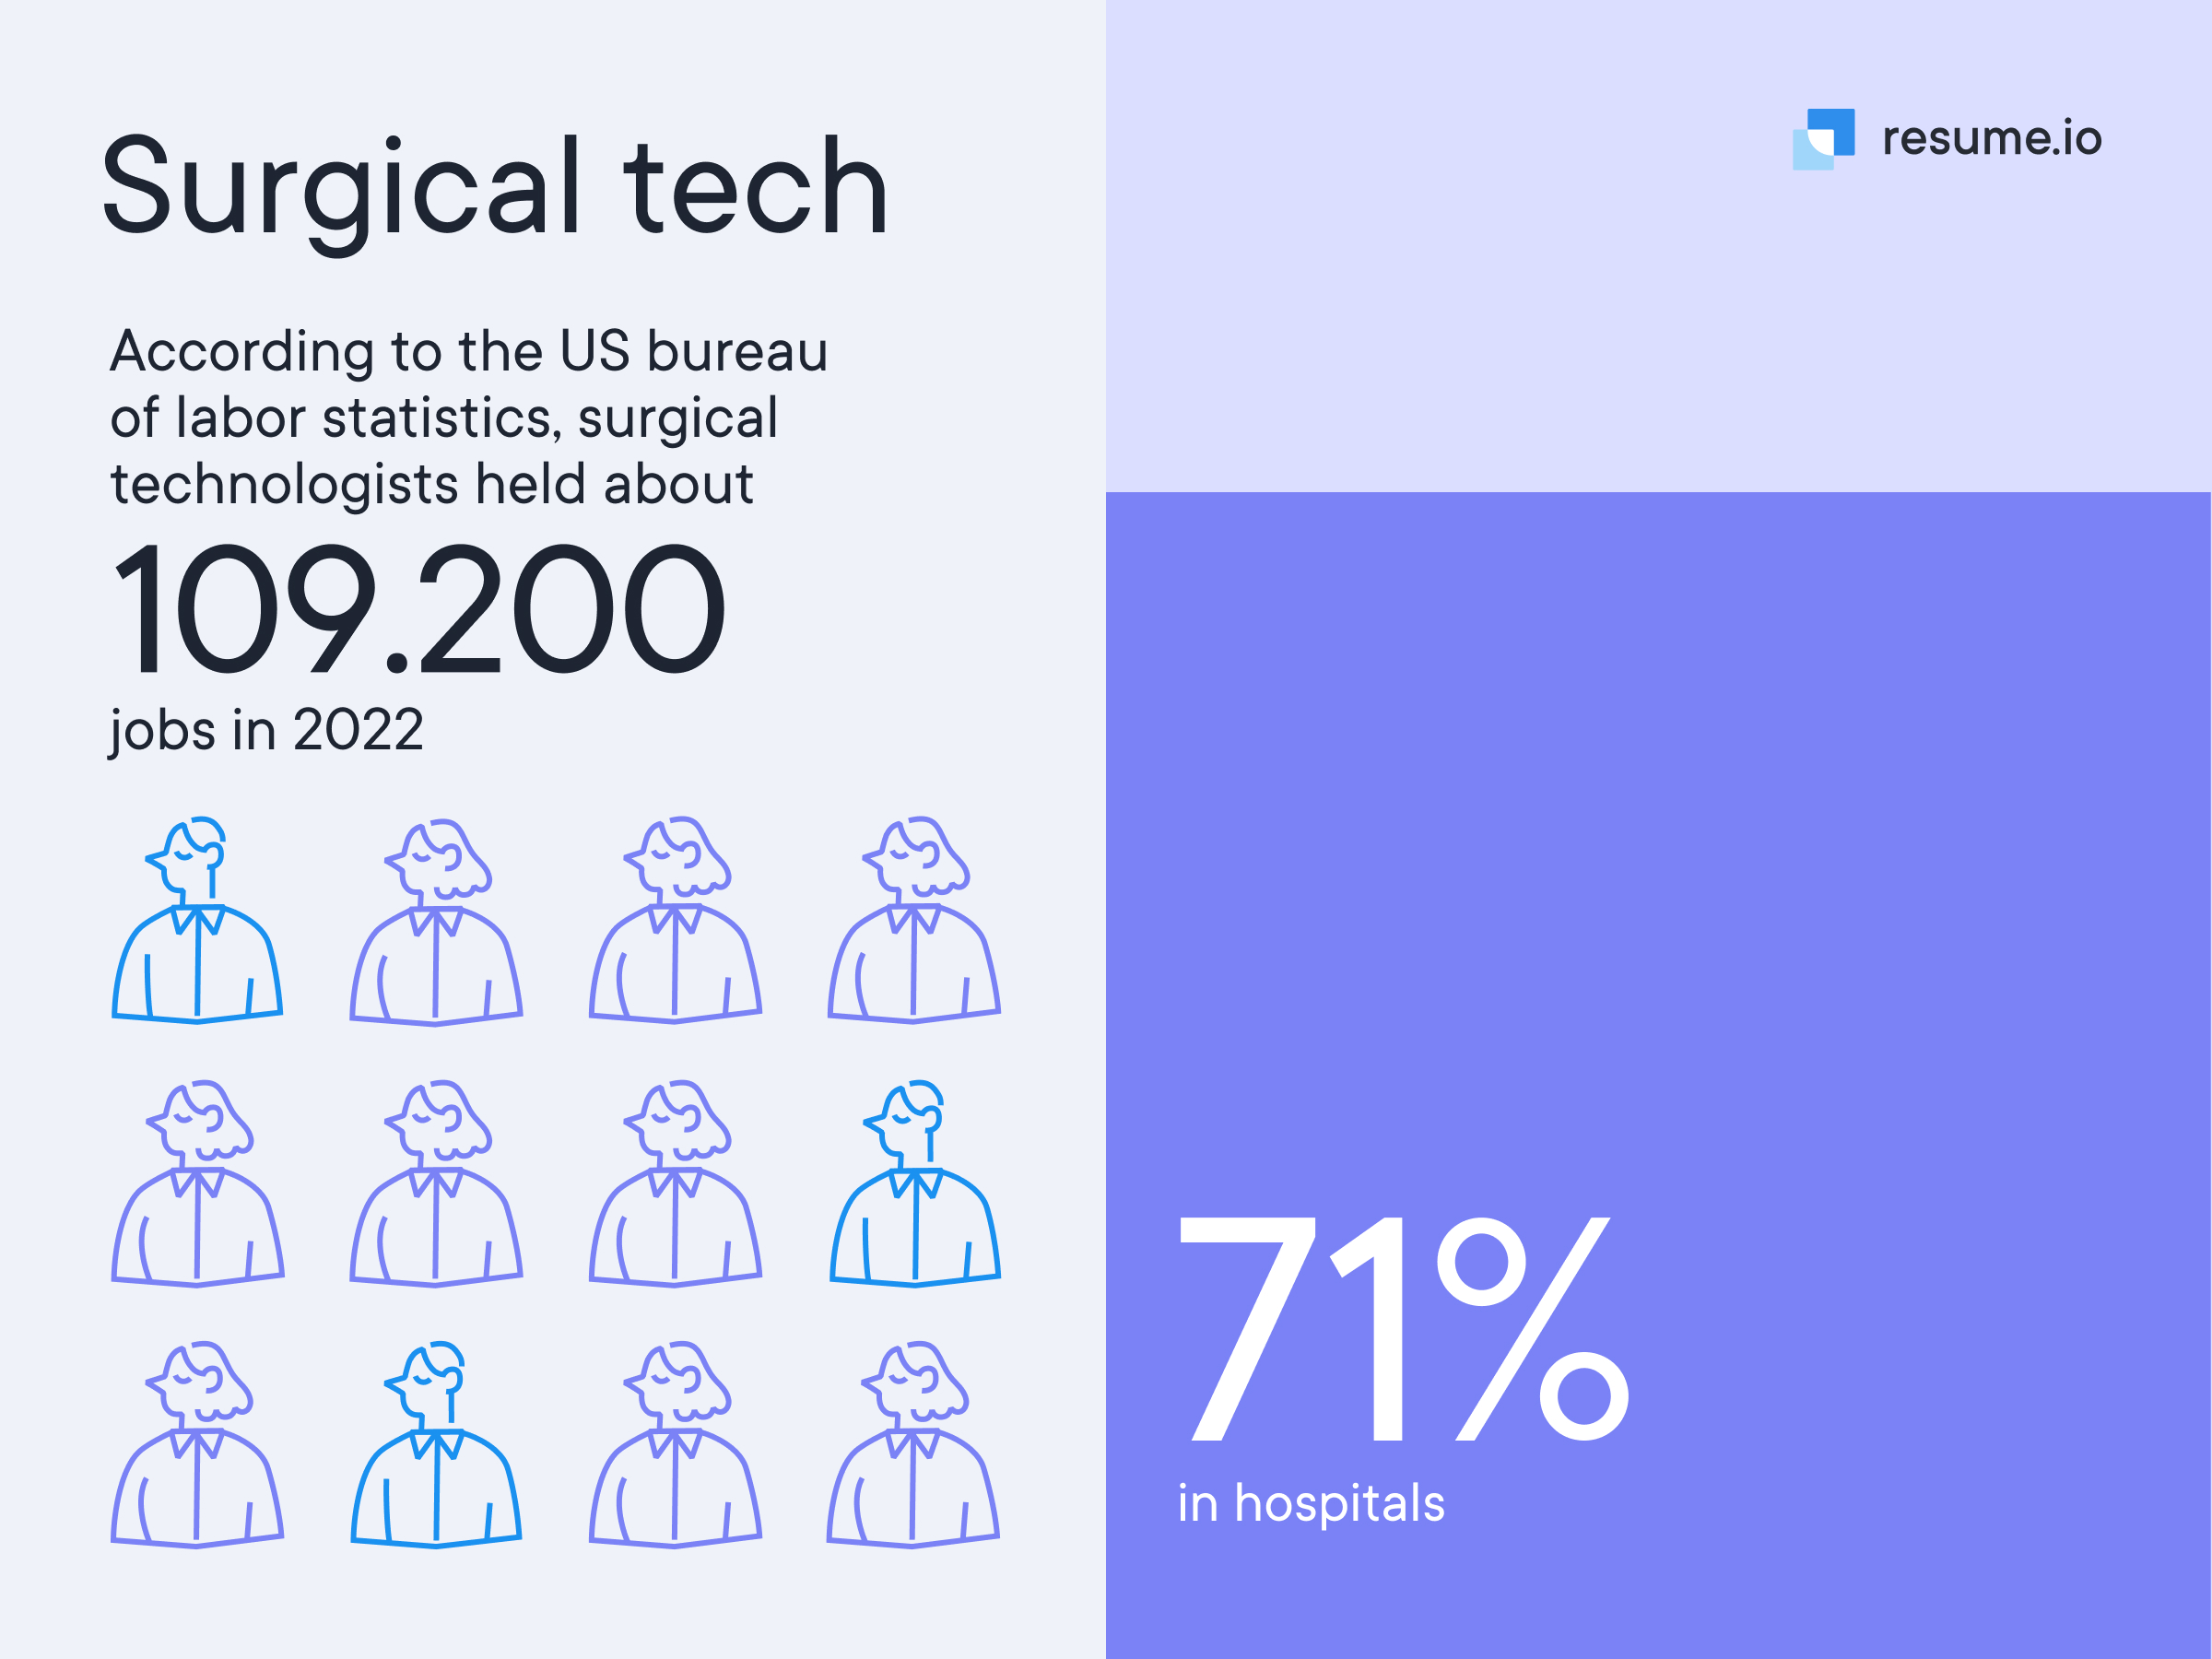 Surgical technologists held about 109.200 jobs in 2022